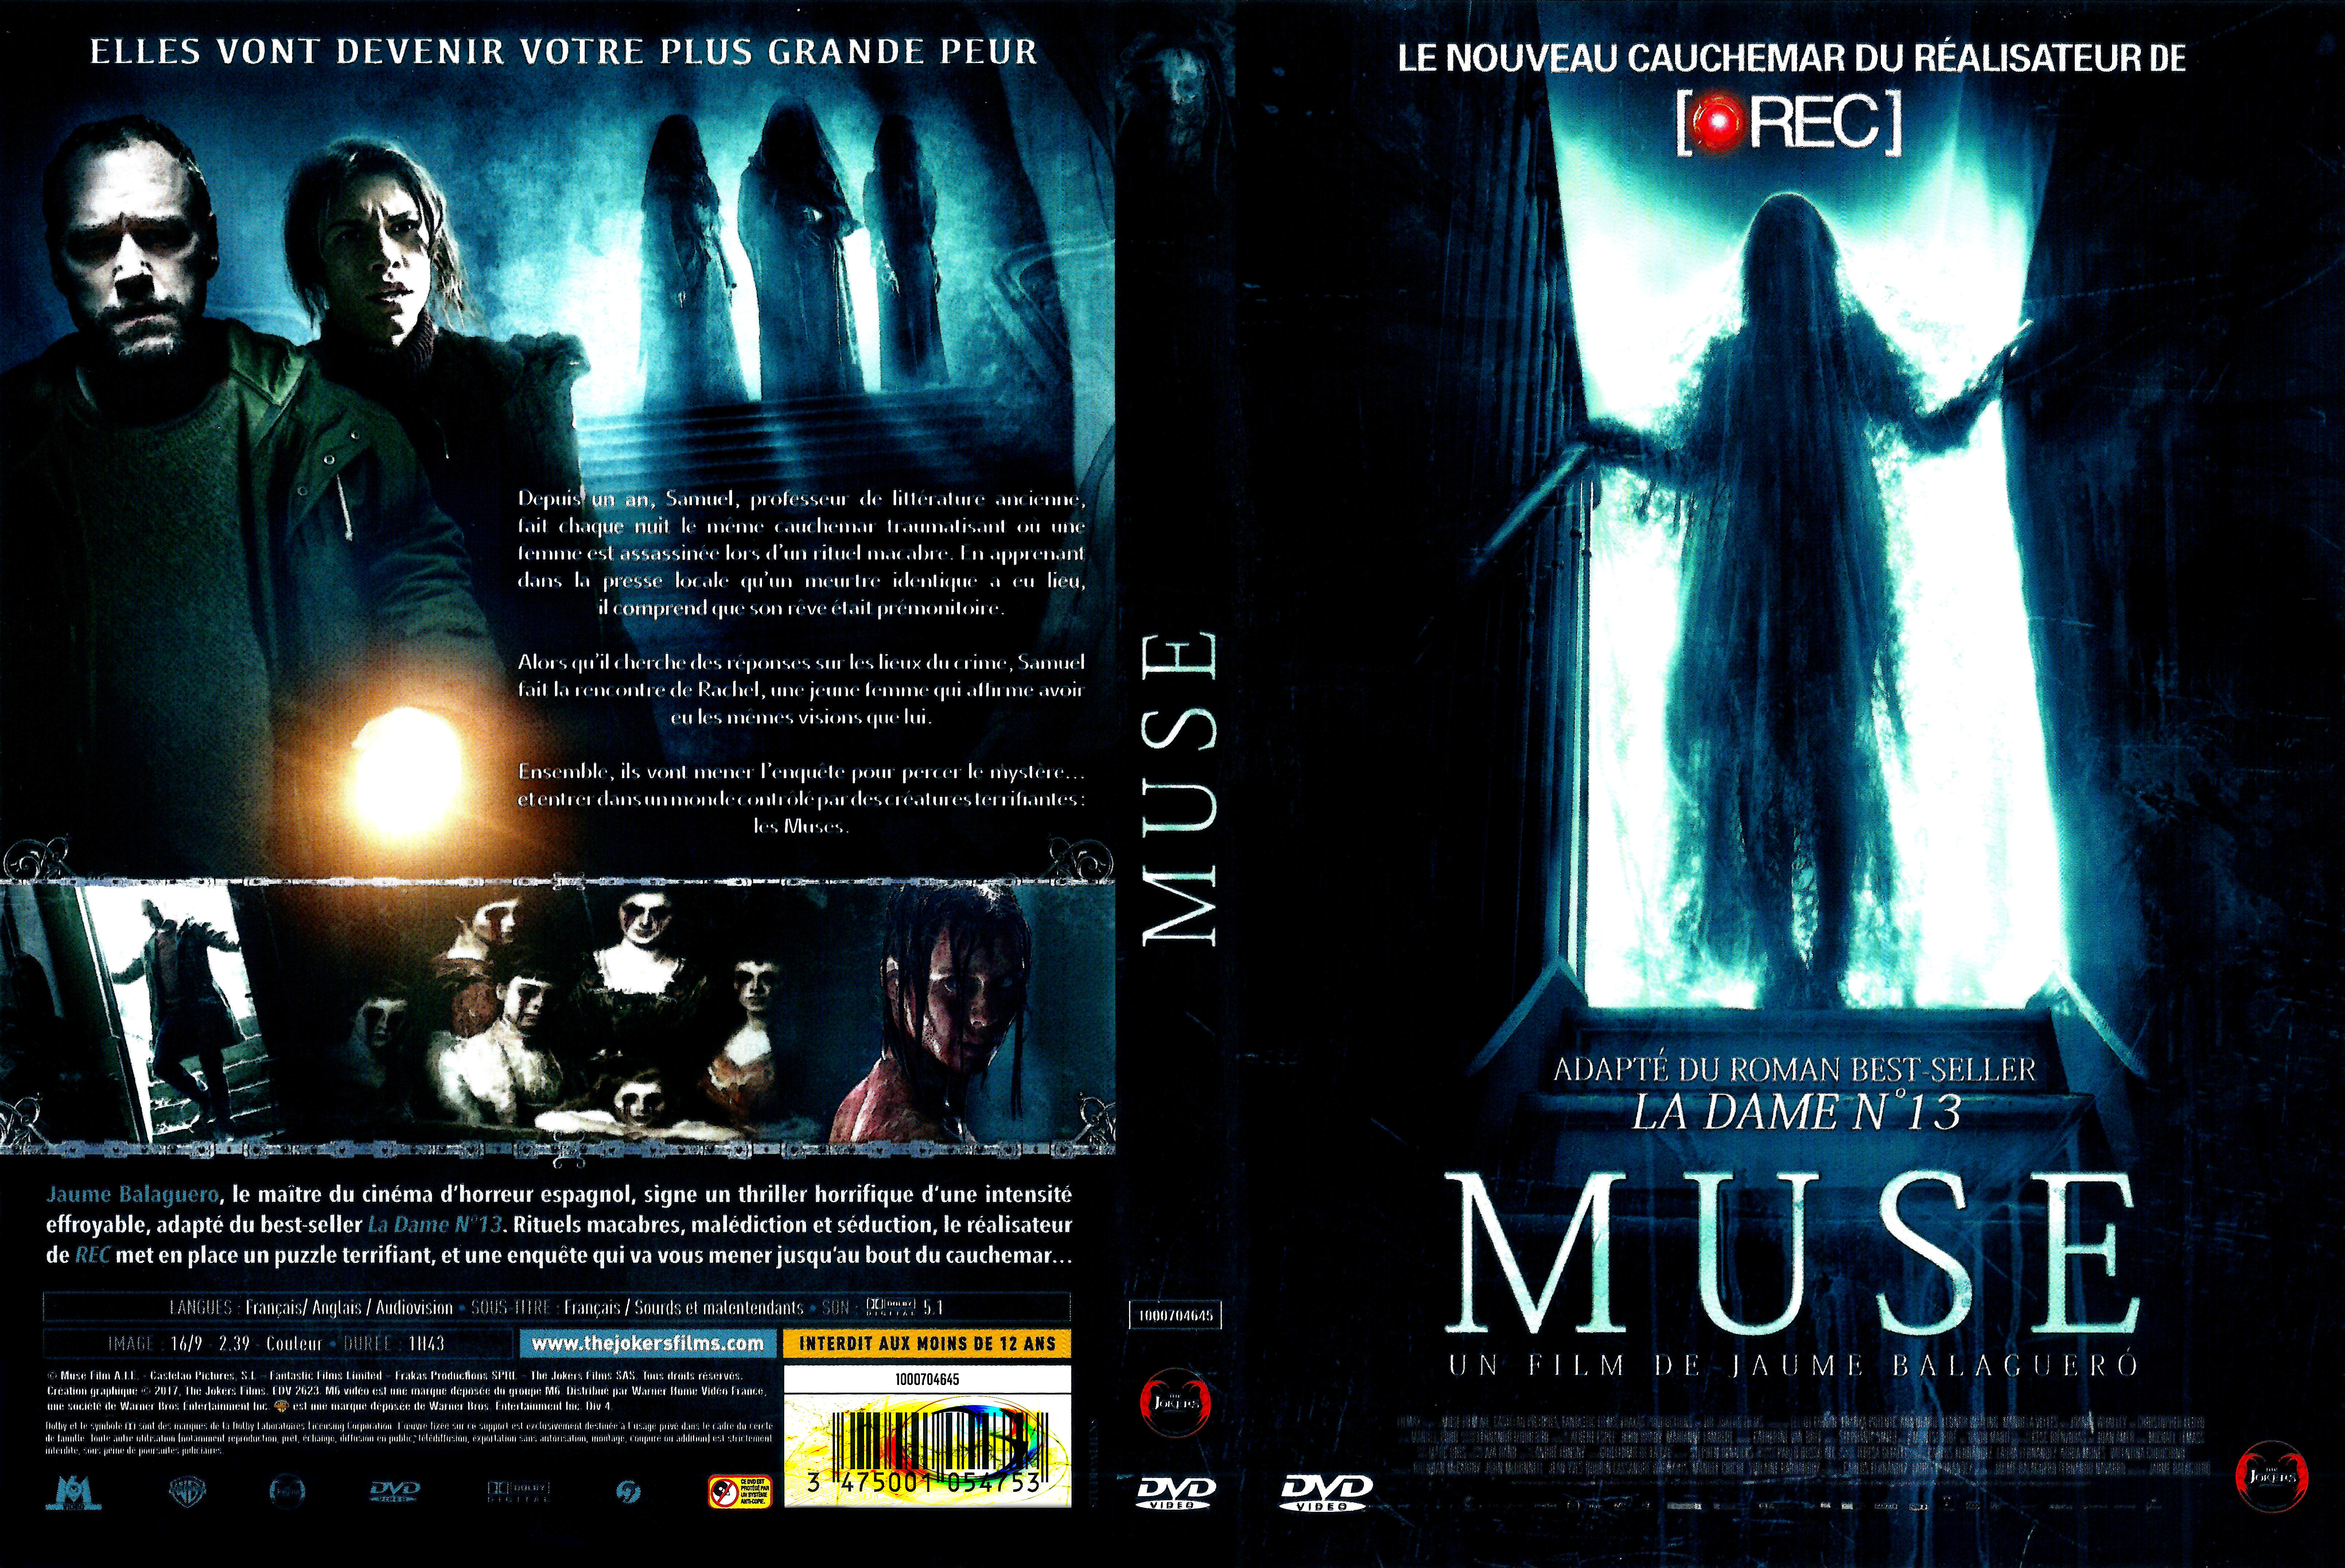 Jaquette DVD Muse